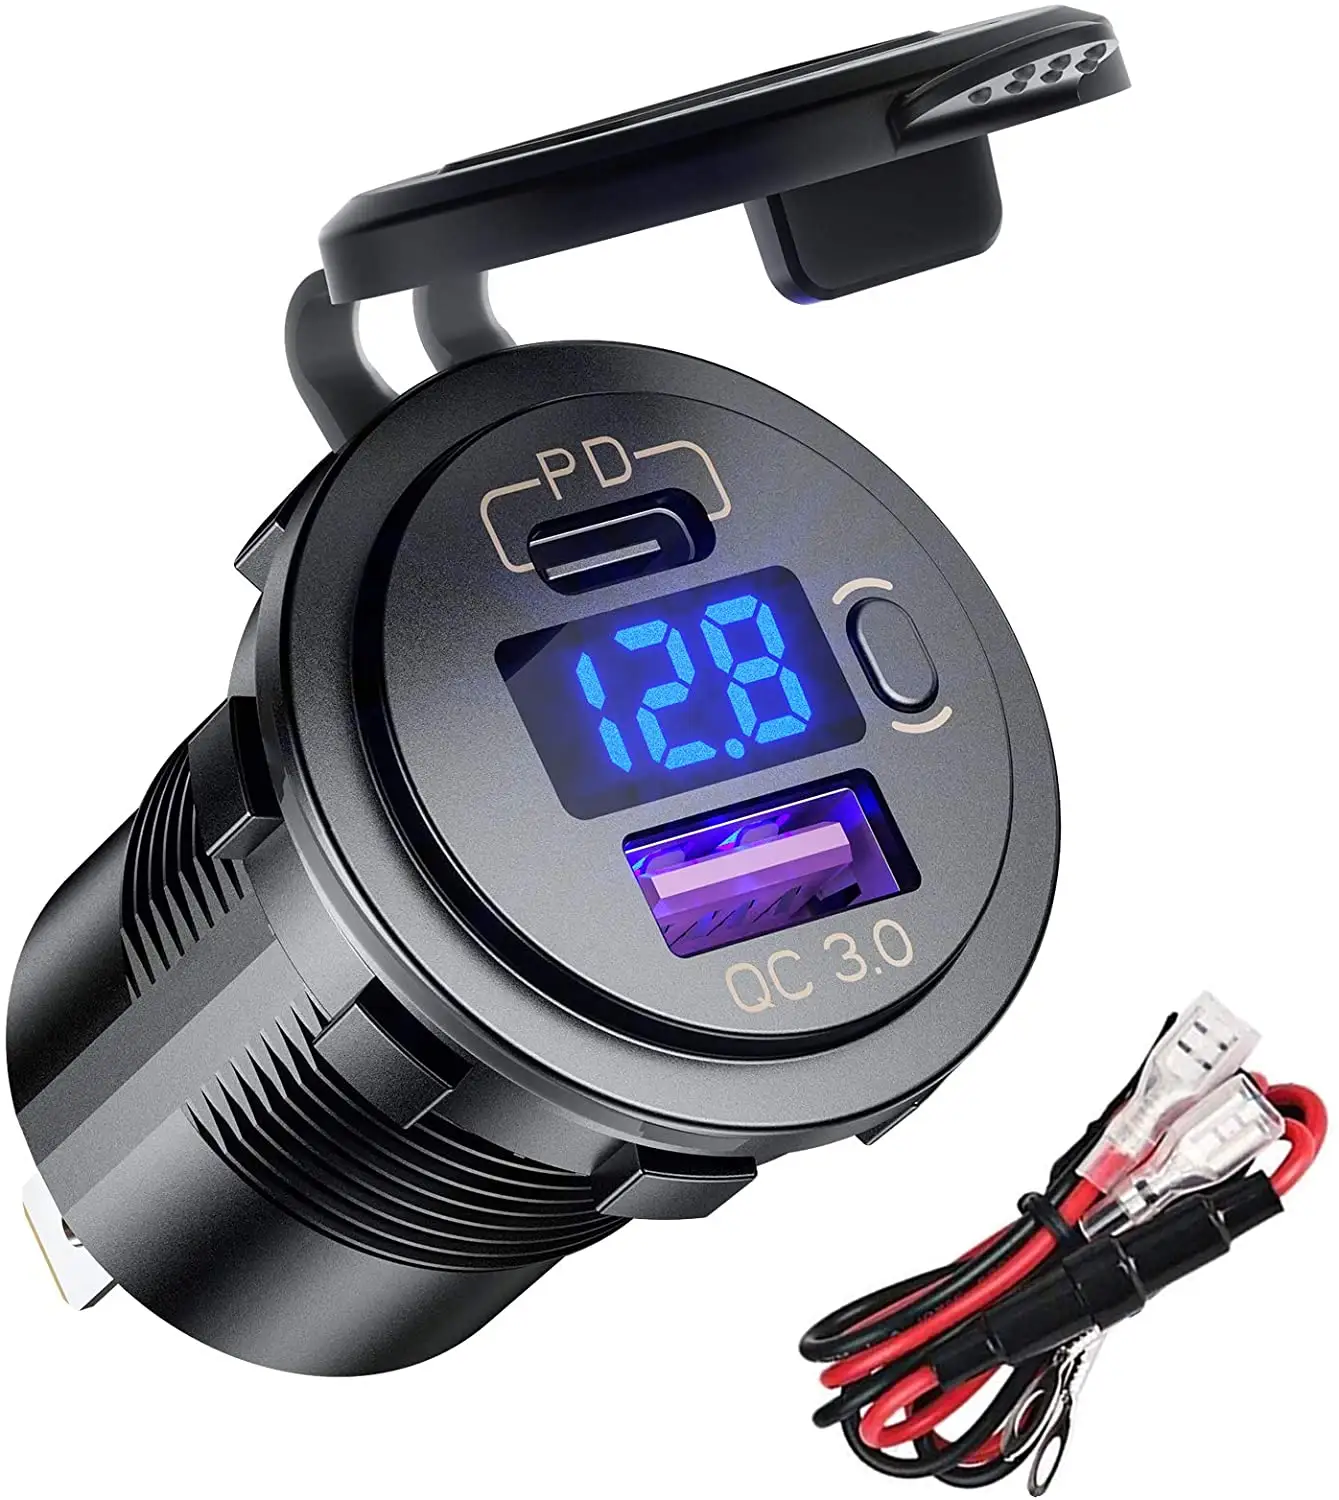 Waterproof Marine Boat USB Charger 12V Dual USB C PD 3.0 Type C QC 3.0 Car Charger Socket Power Outlet With LED Voltmeter Switch